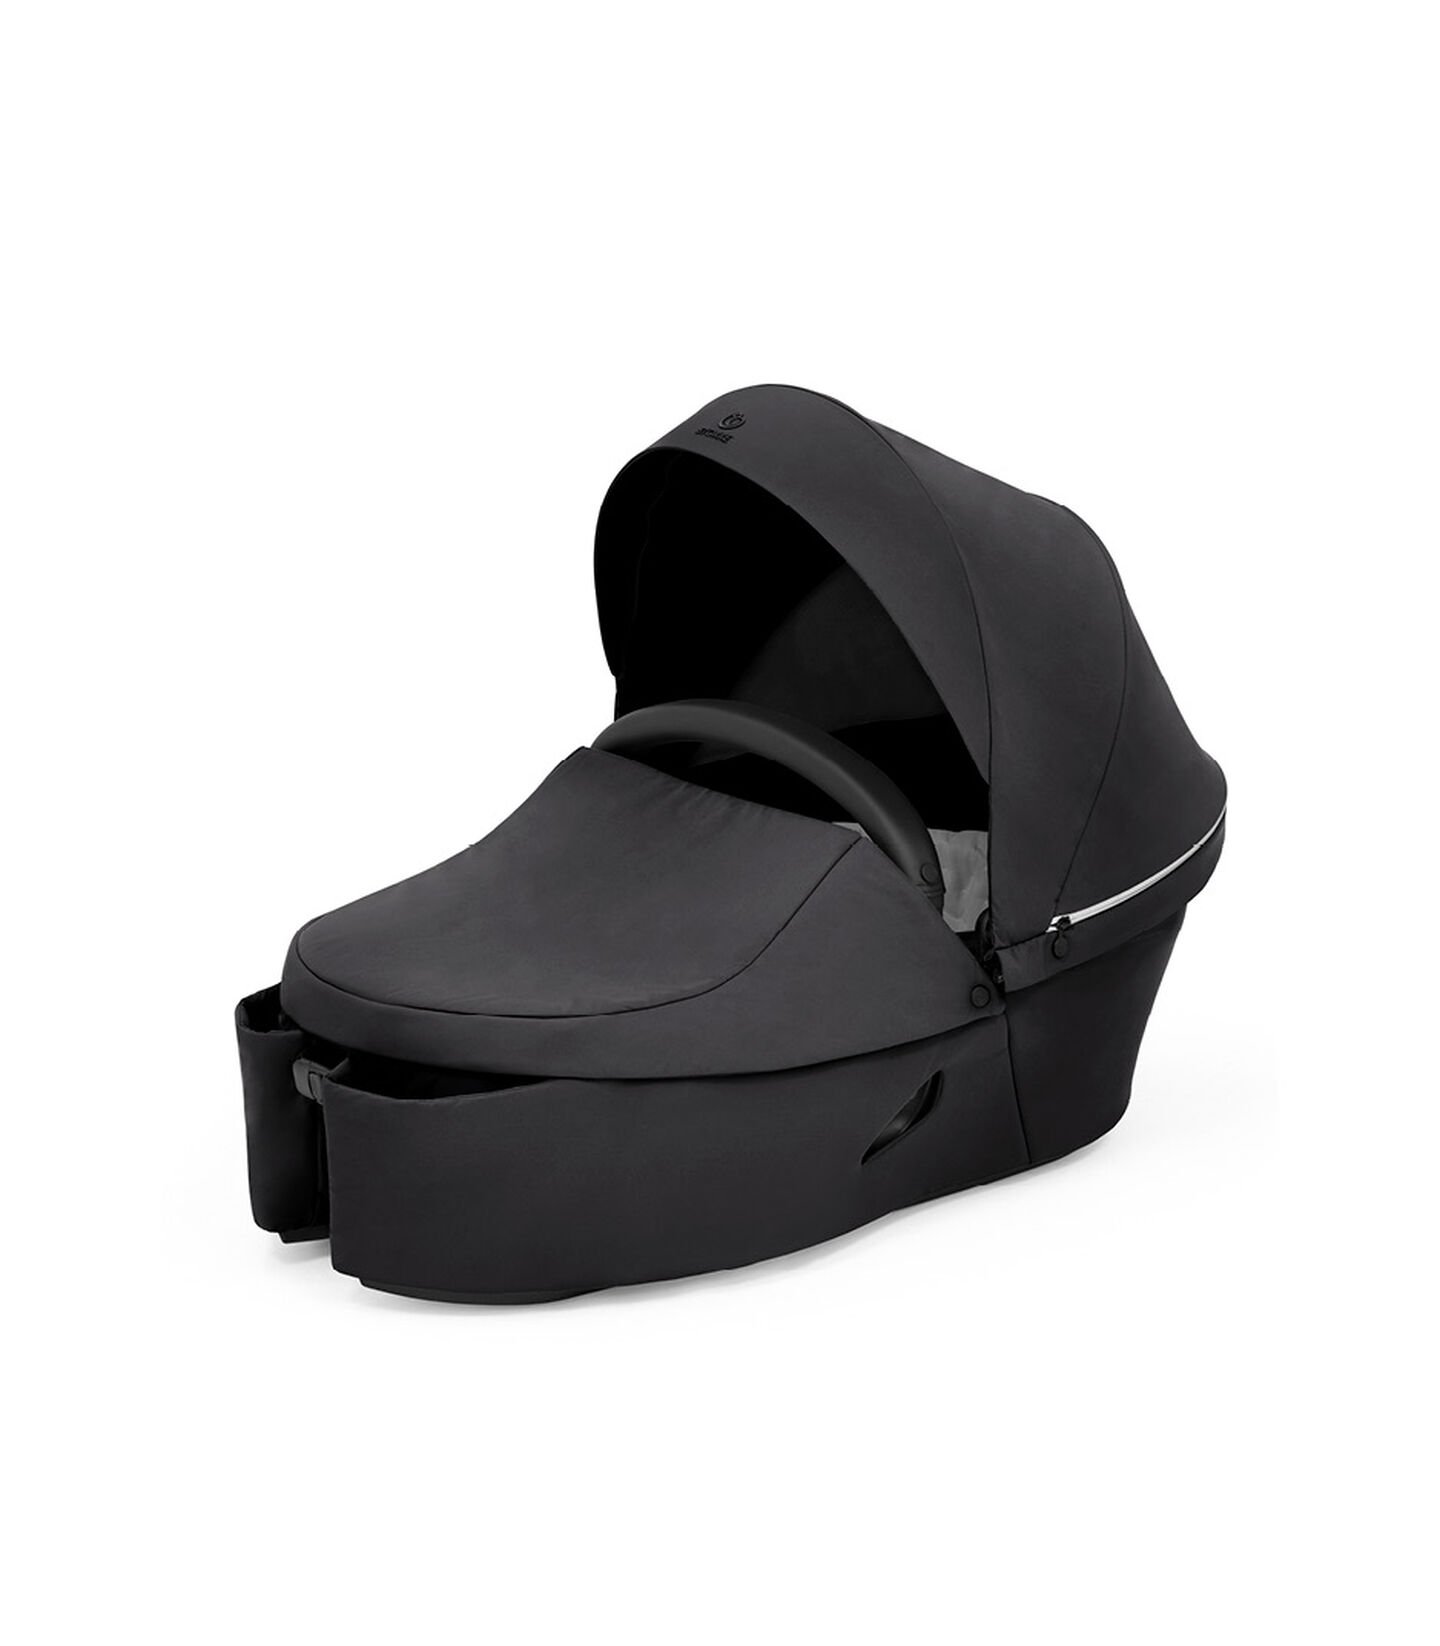 Stokke® Xplory® X Carry Cot Rich Black, 深黑色, mainview view 5